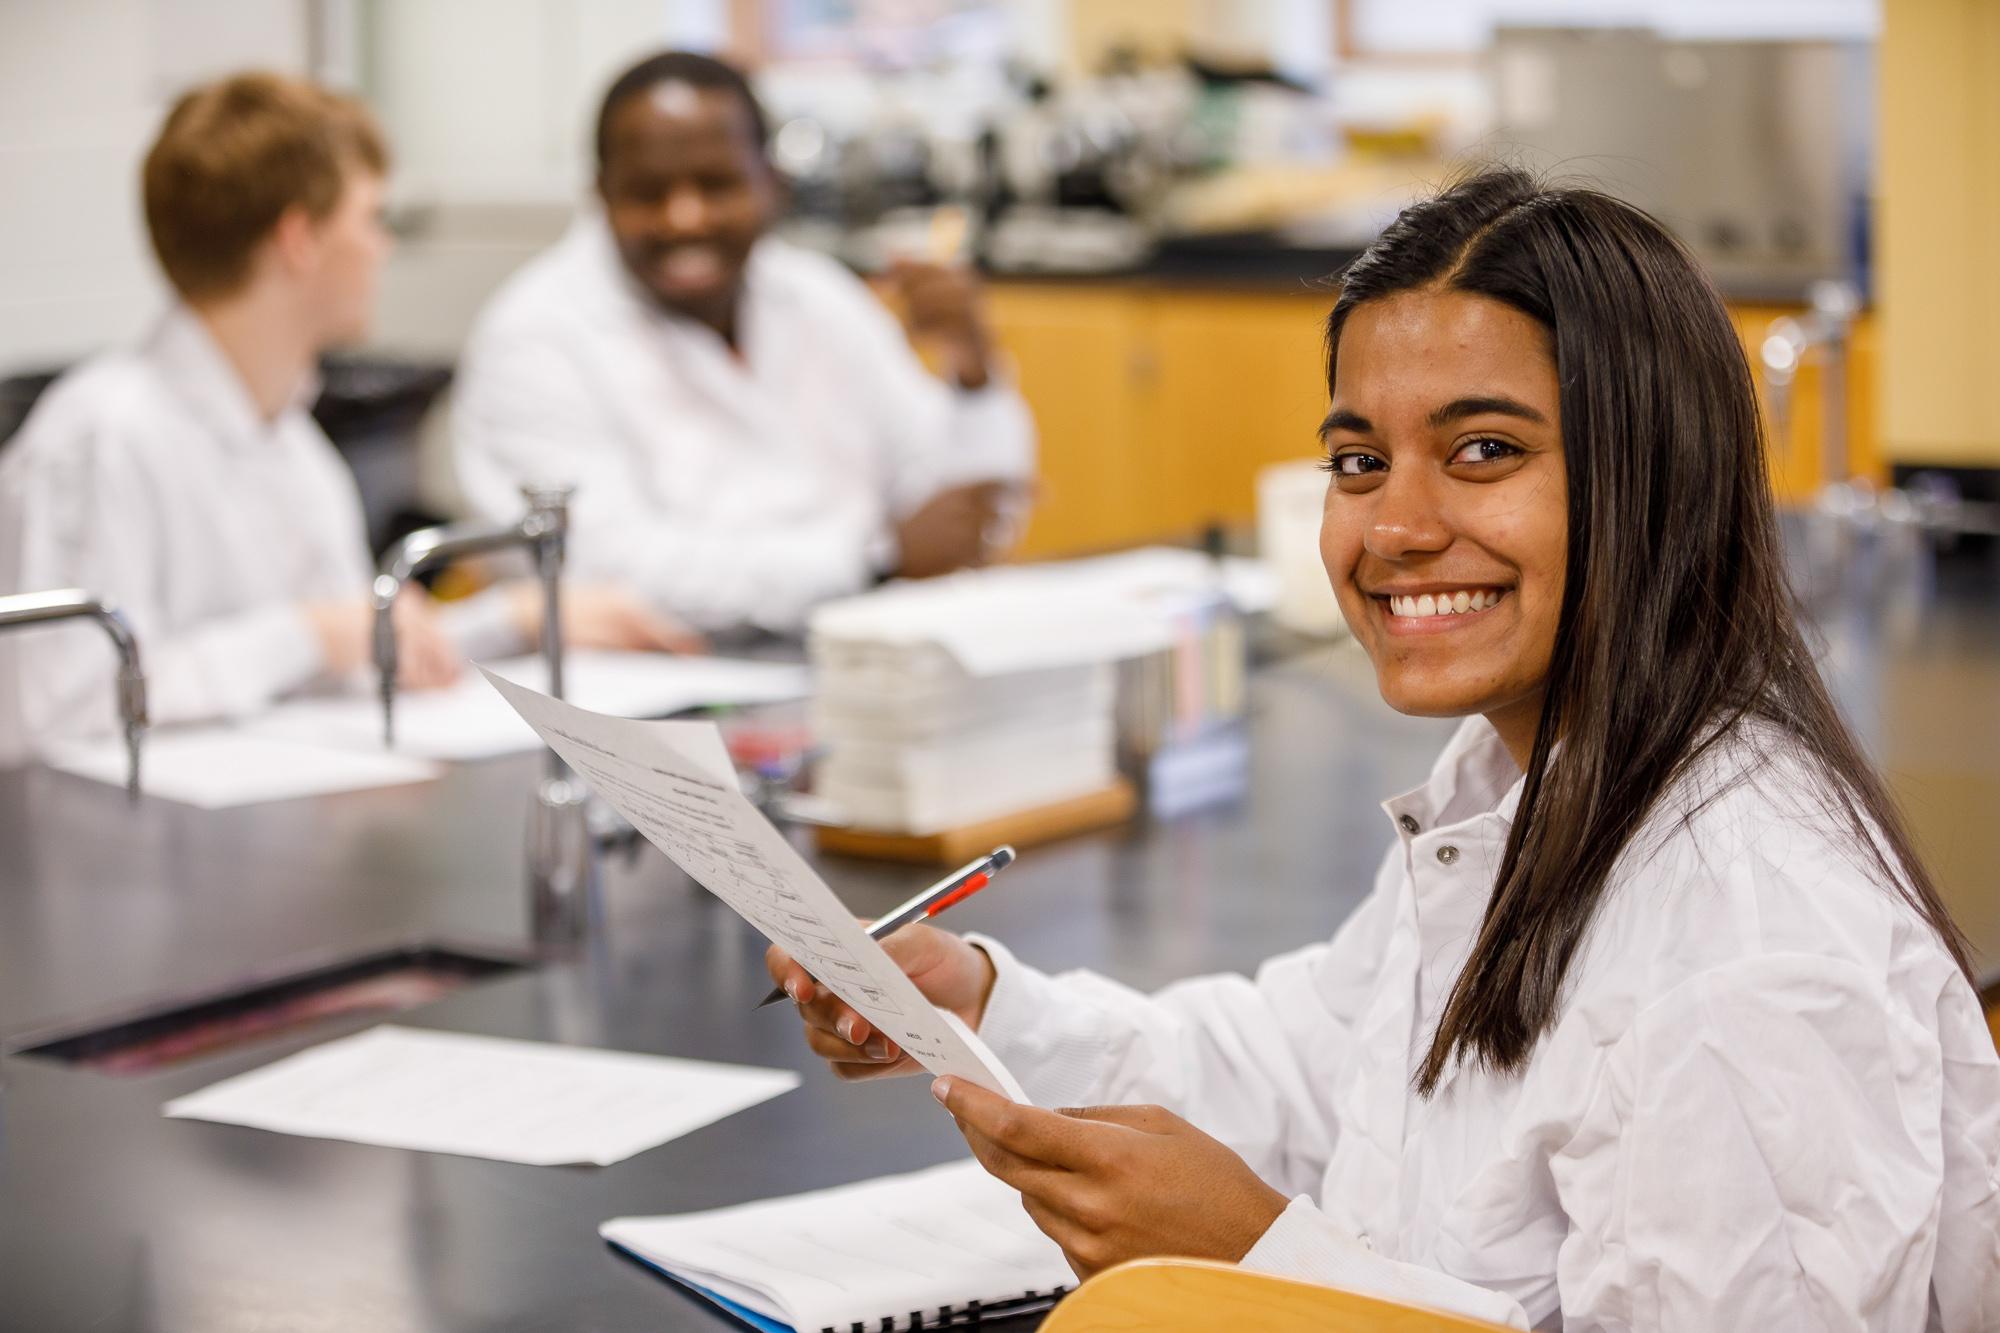 Woman in a lab coat smiling while holding a paper, two students talk behind her